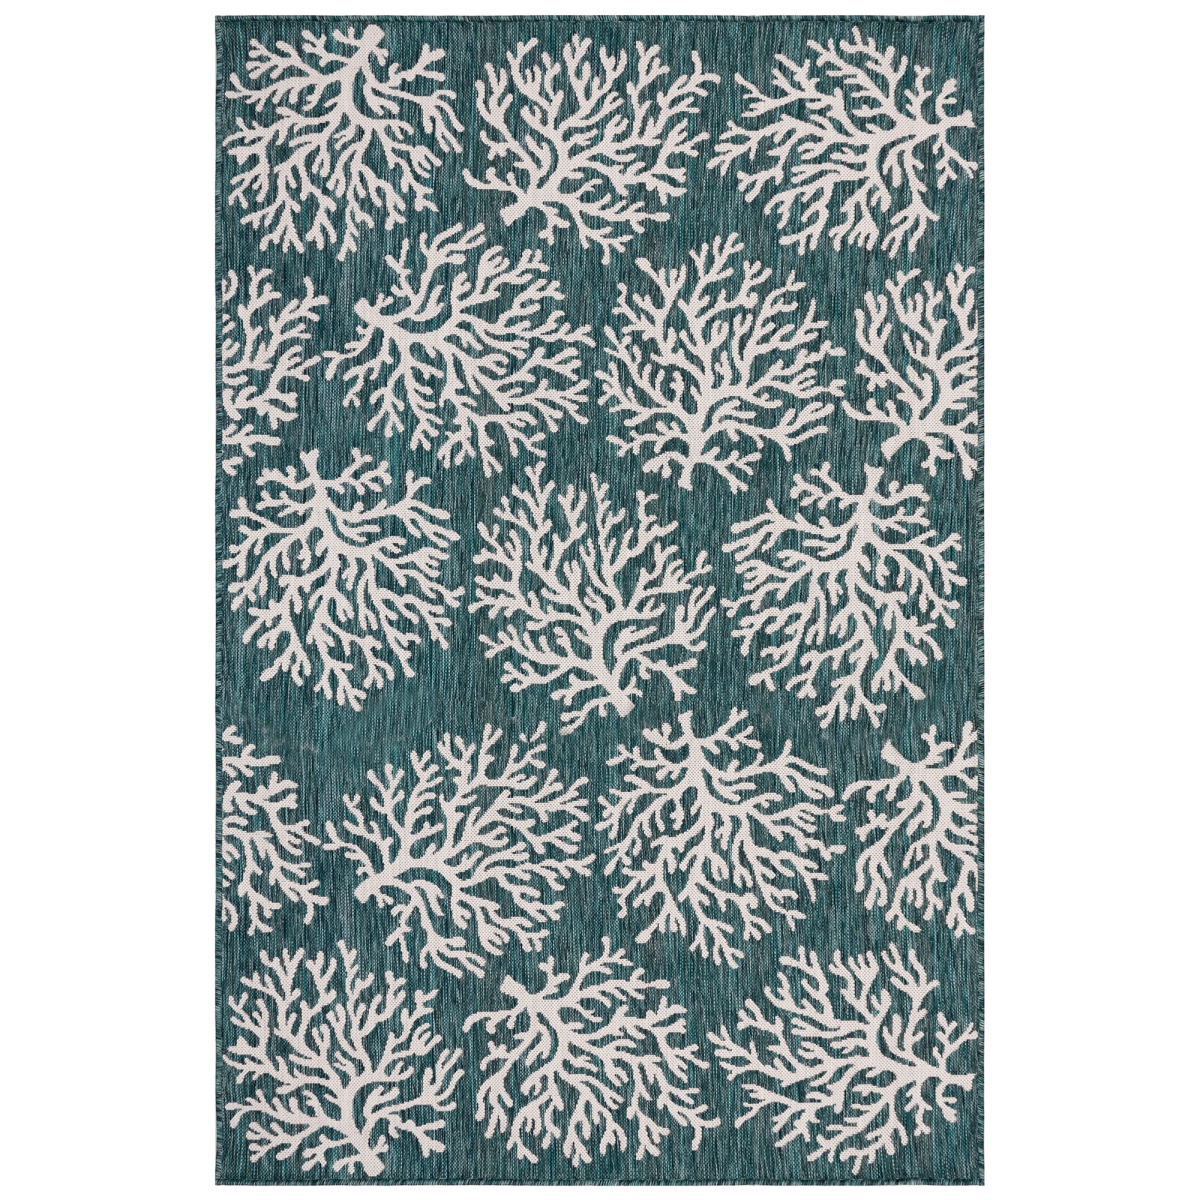 Cre80844194 Liora Manne Carmel Coral Indoor & Outdoor Rug, Teal - 7 Ft. 10 In. X 9 Ft. 10 In.